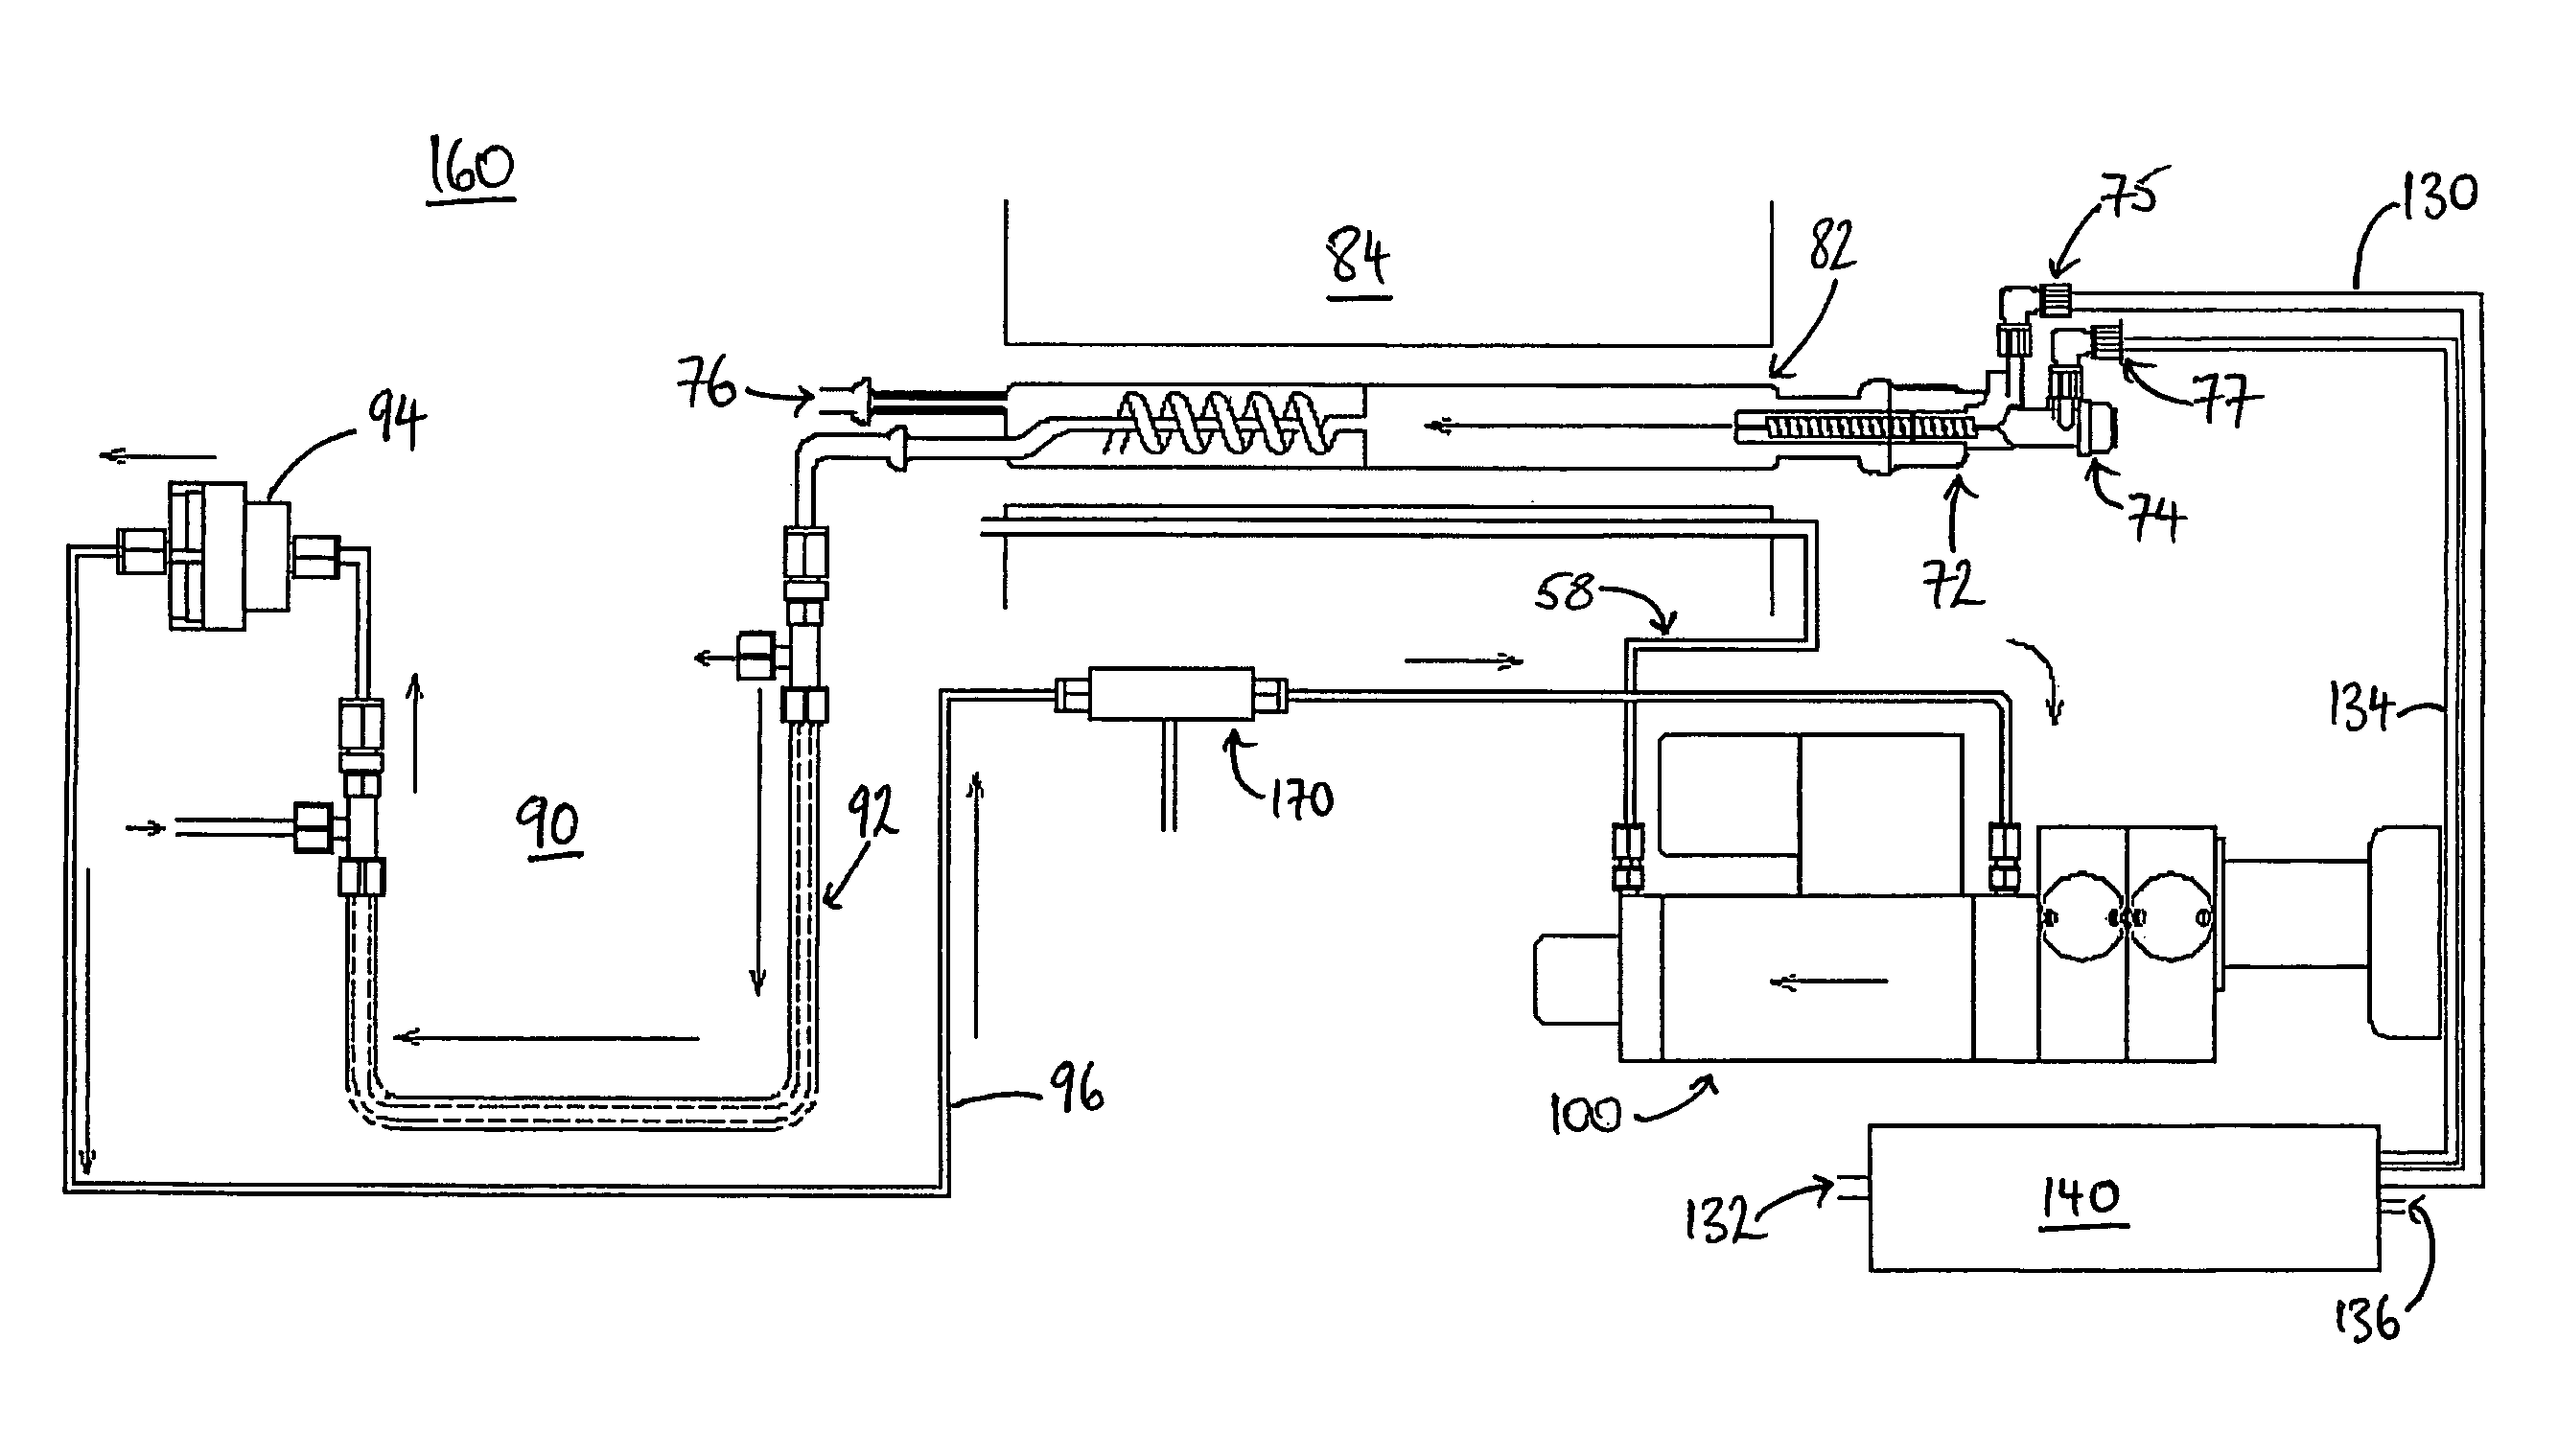 Combustion analysis apparatus and method